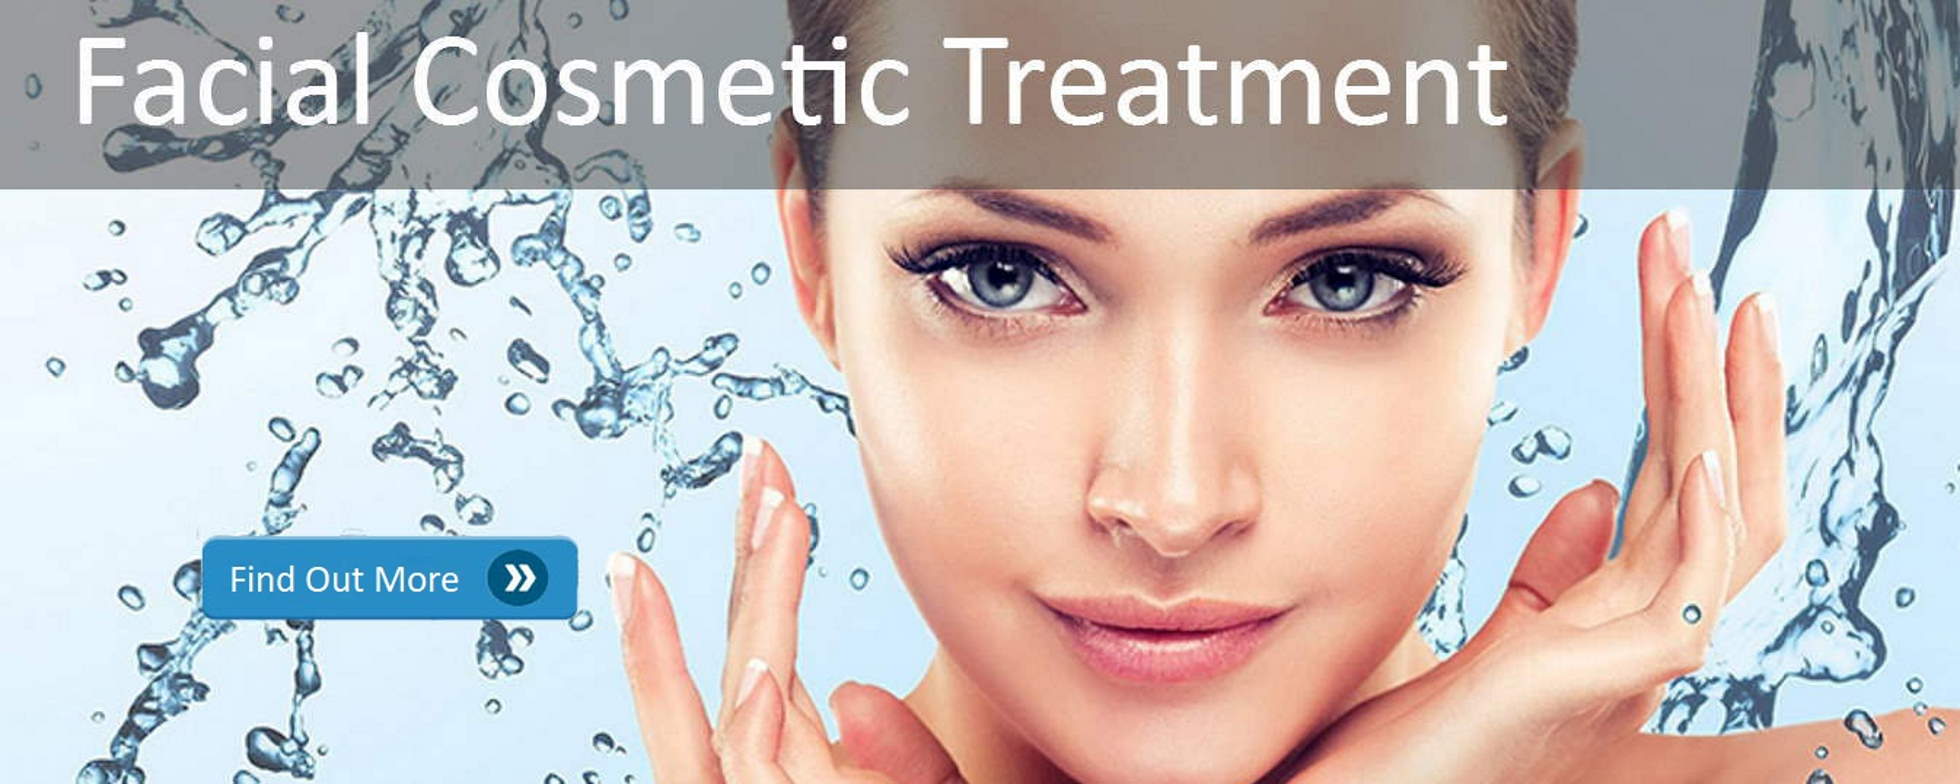 Facial Cosmetic Treatment 1960x784 1test